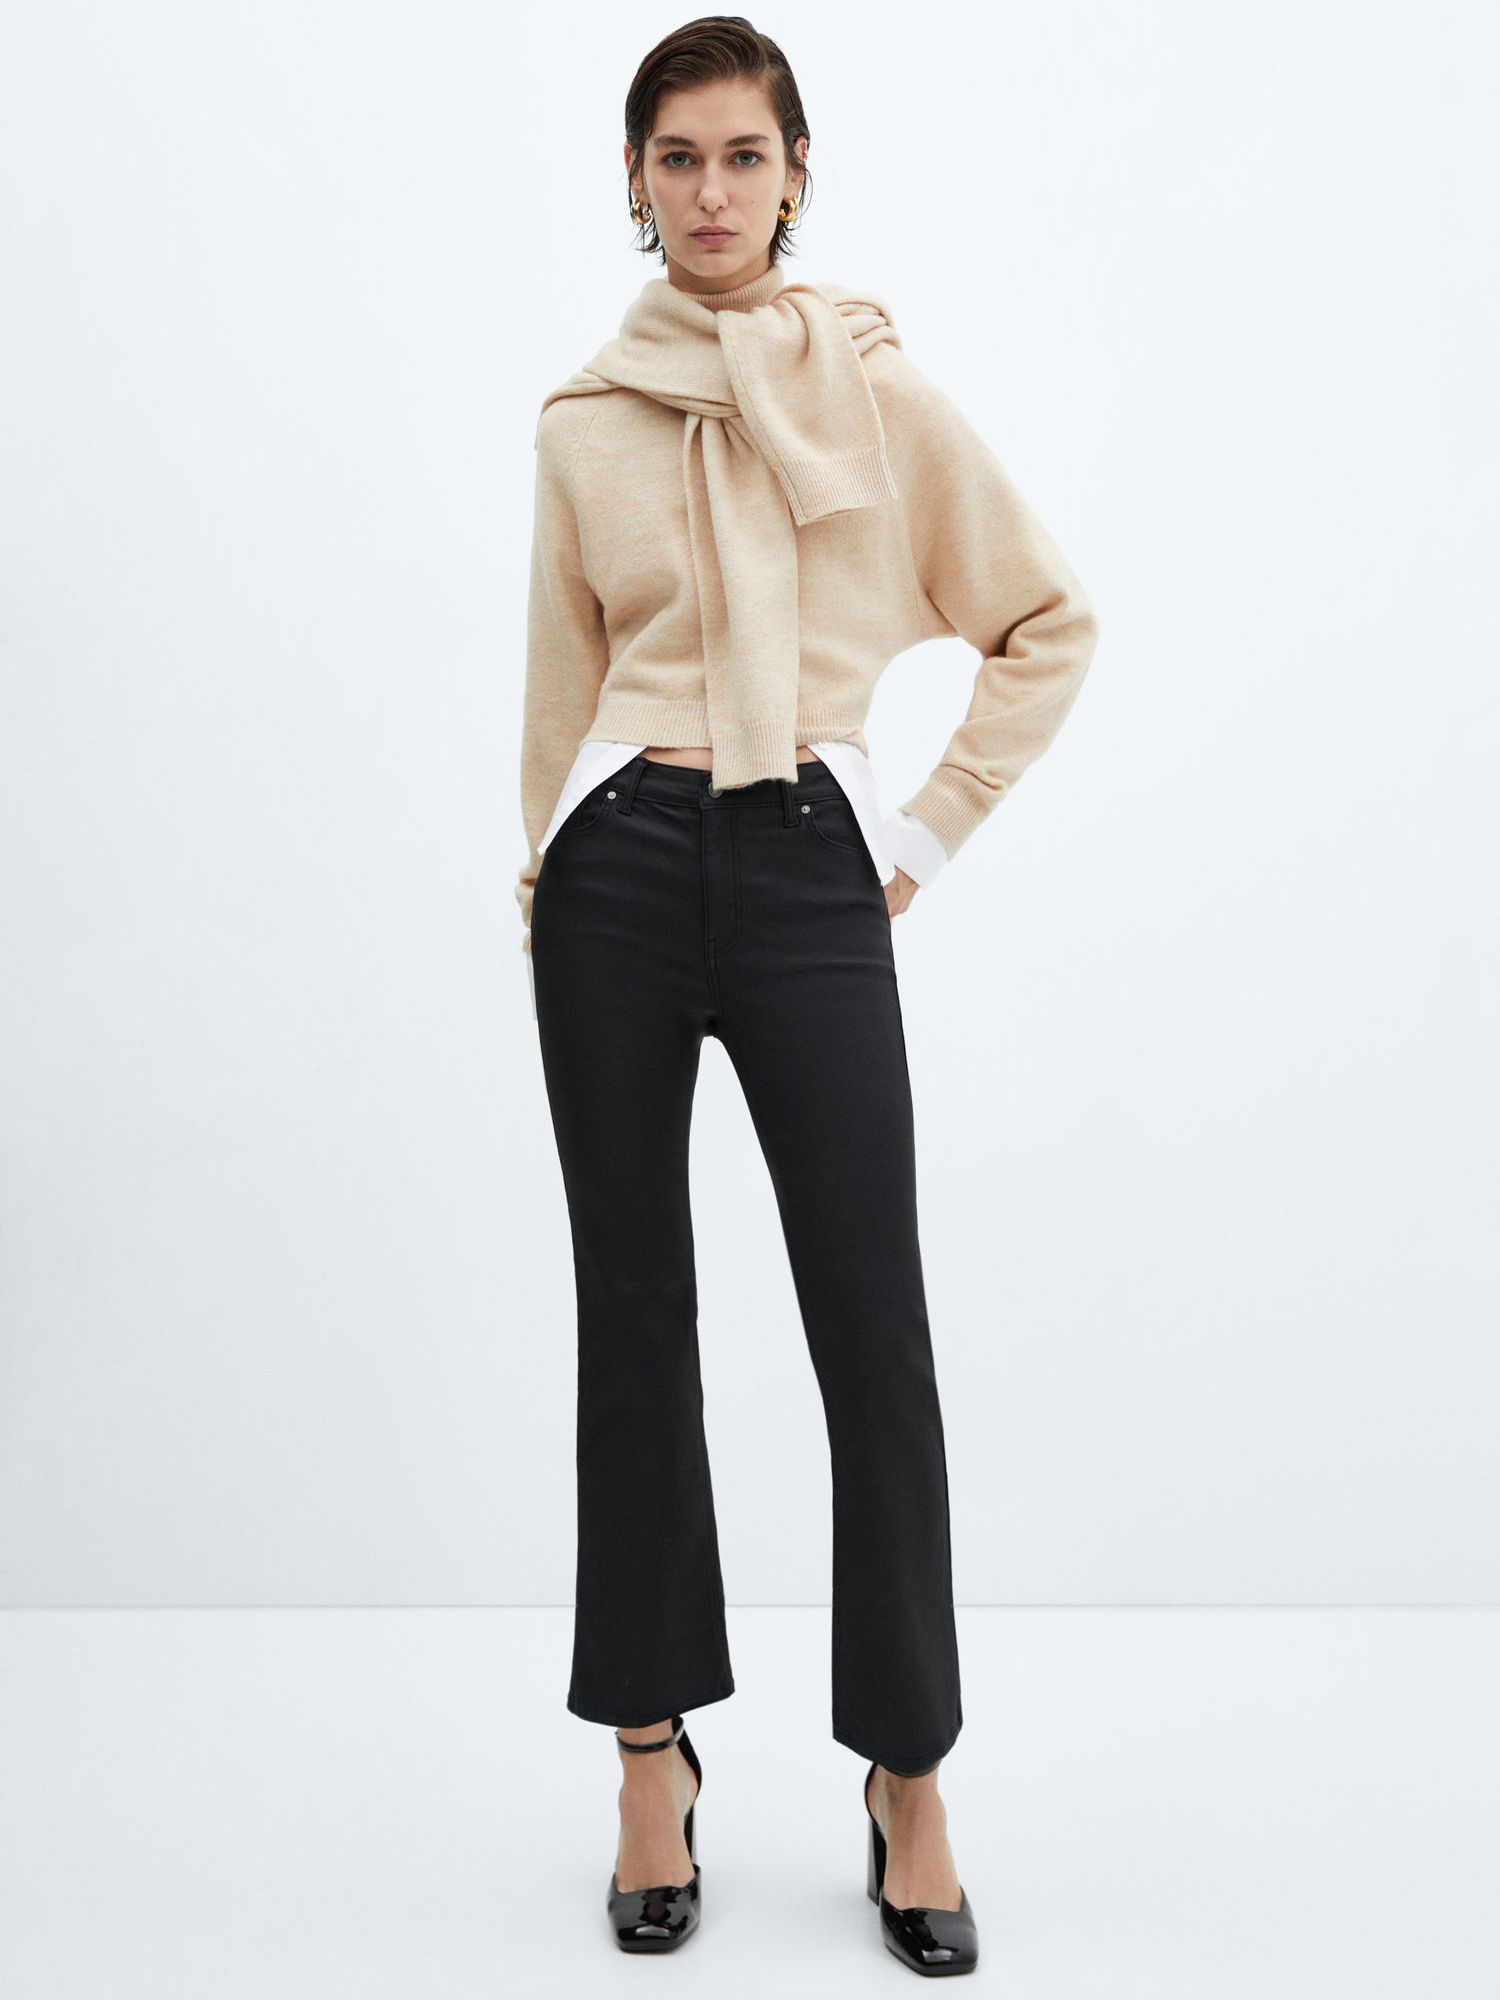 Buy Mango Sienna Waxed Flared Cropped Jeans, Black Online at johnlewis.com